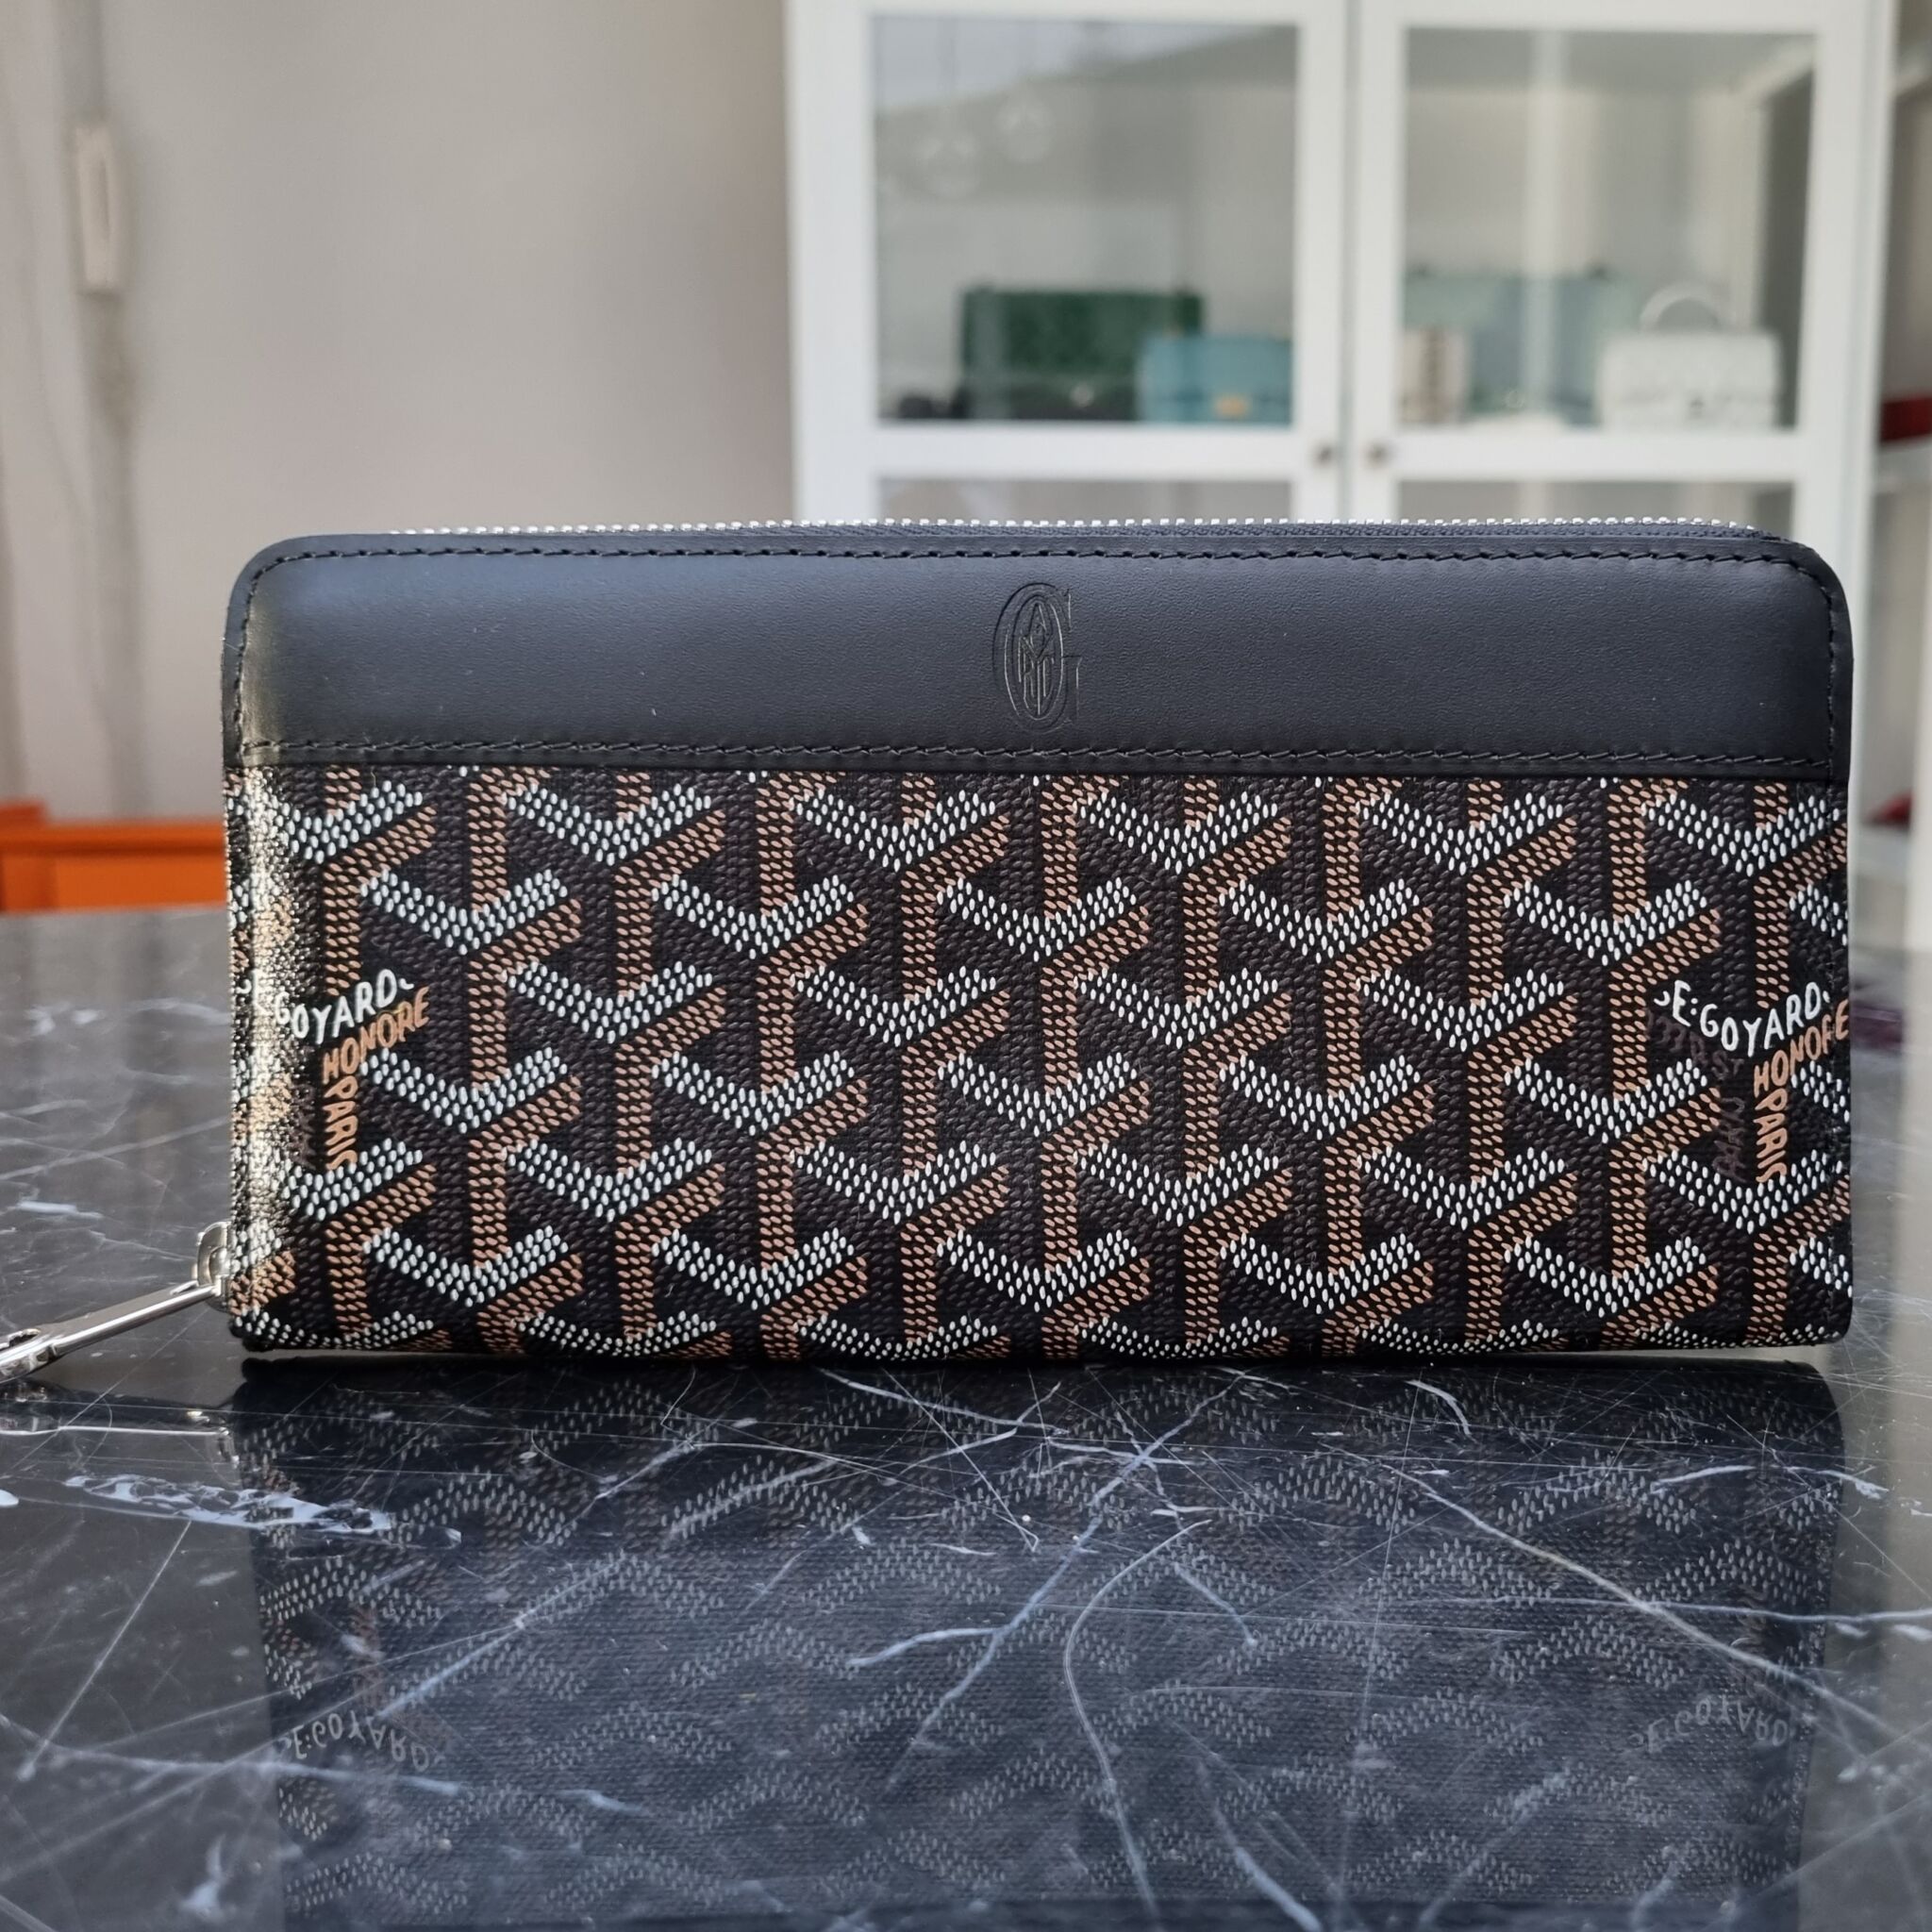 Goyard matignon long wallet for Sale in Larchmont, NY - OfferUp